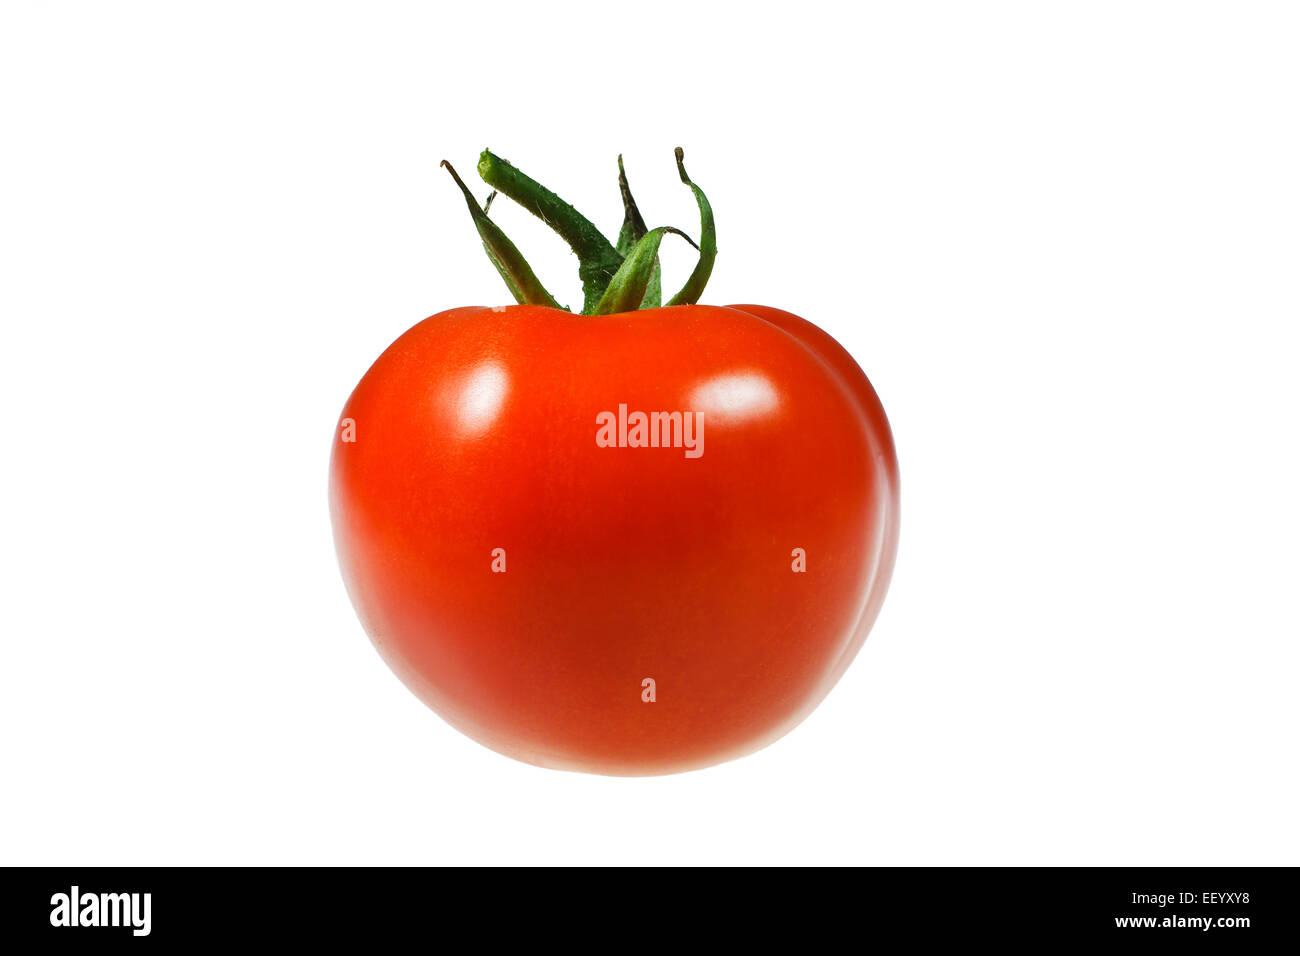 A red tomato is optional. Stock Photo